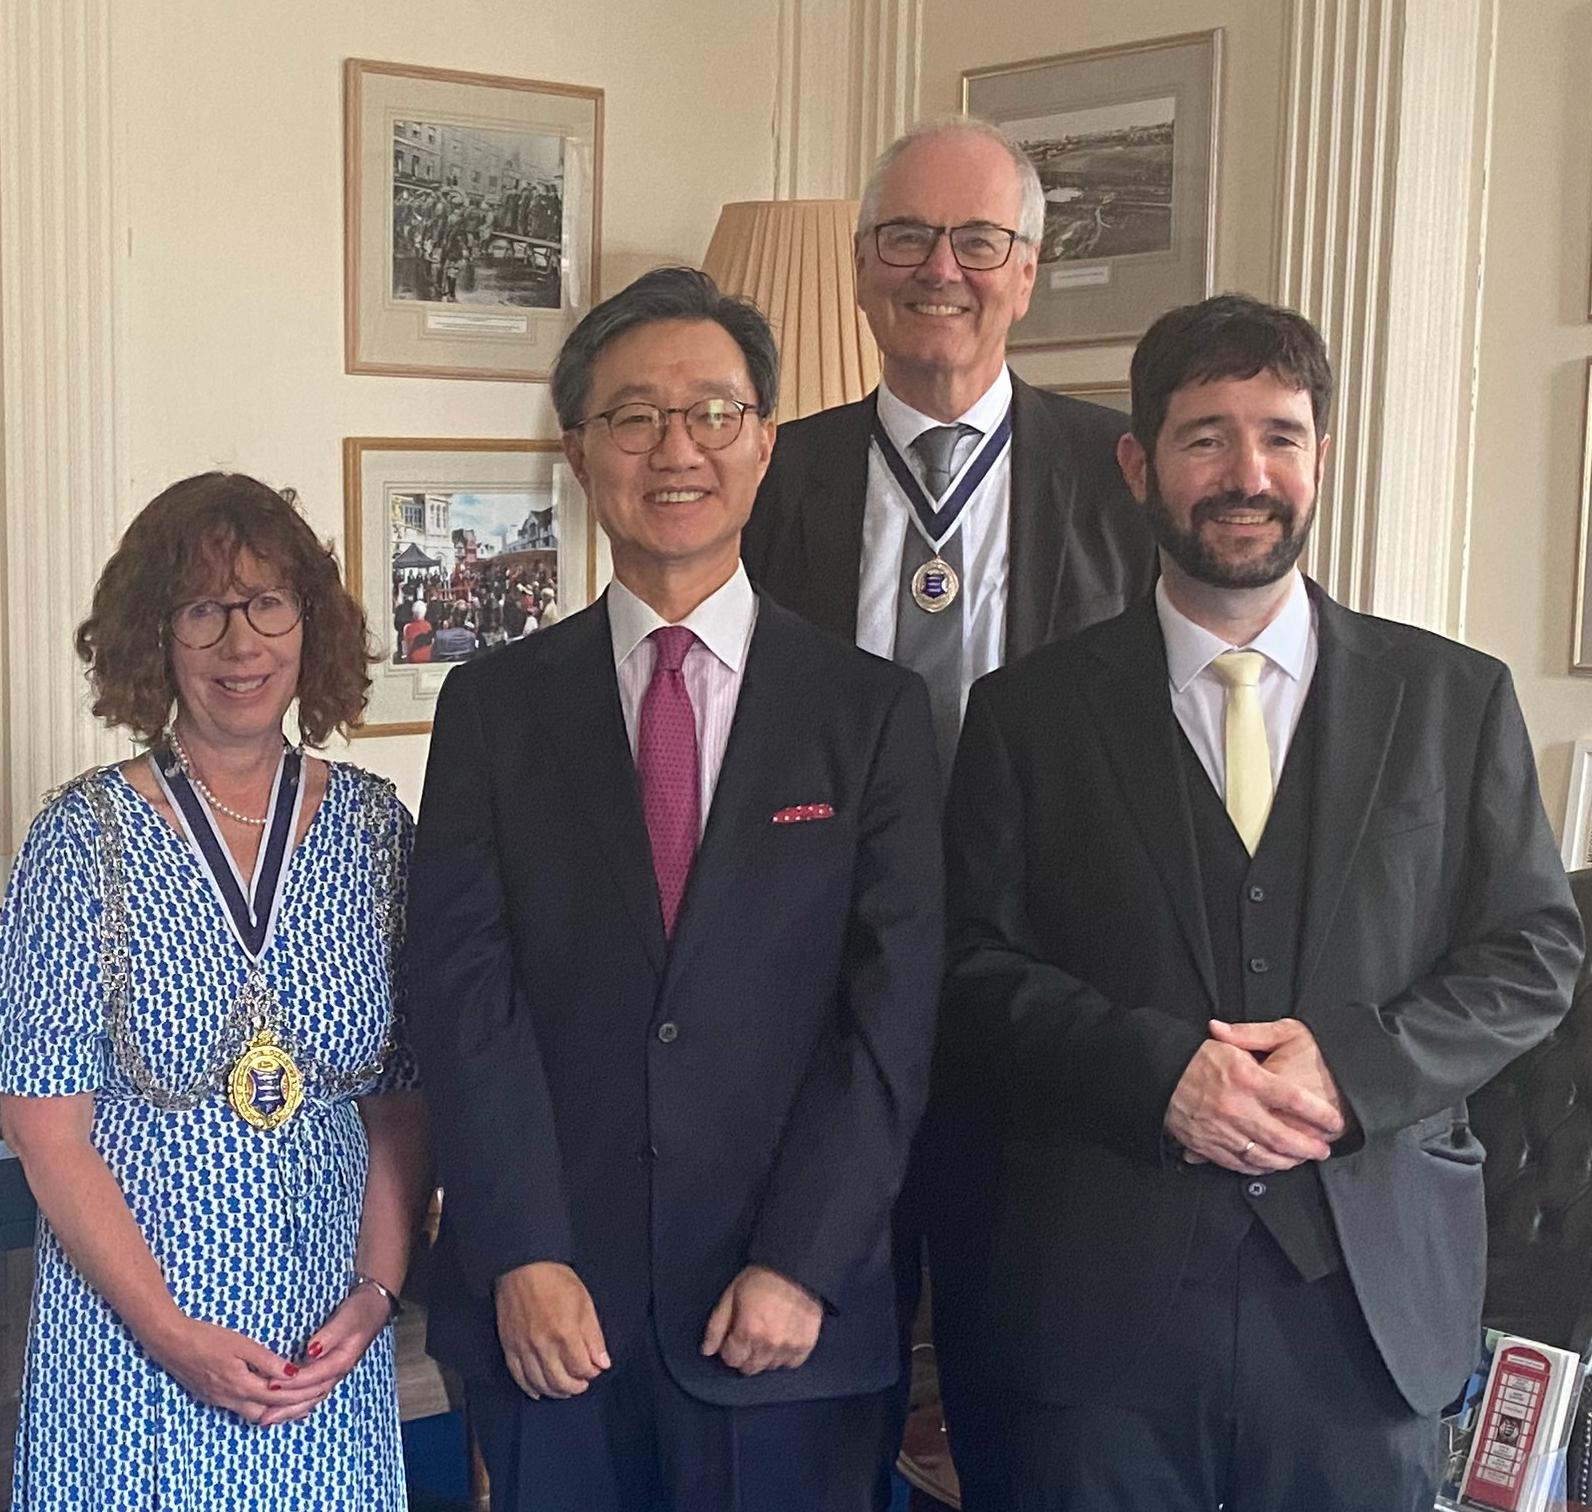 The Ambassador of the Republic of Korea with the Mayor and Deputy Mayor of Kingston and the Leader of Kingston Council